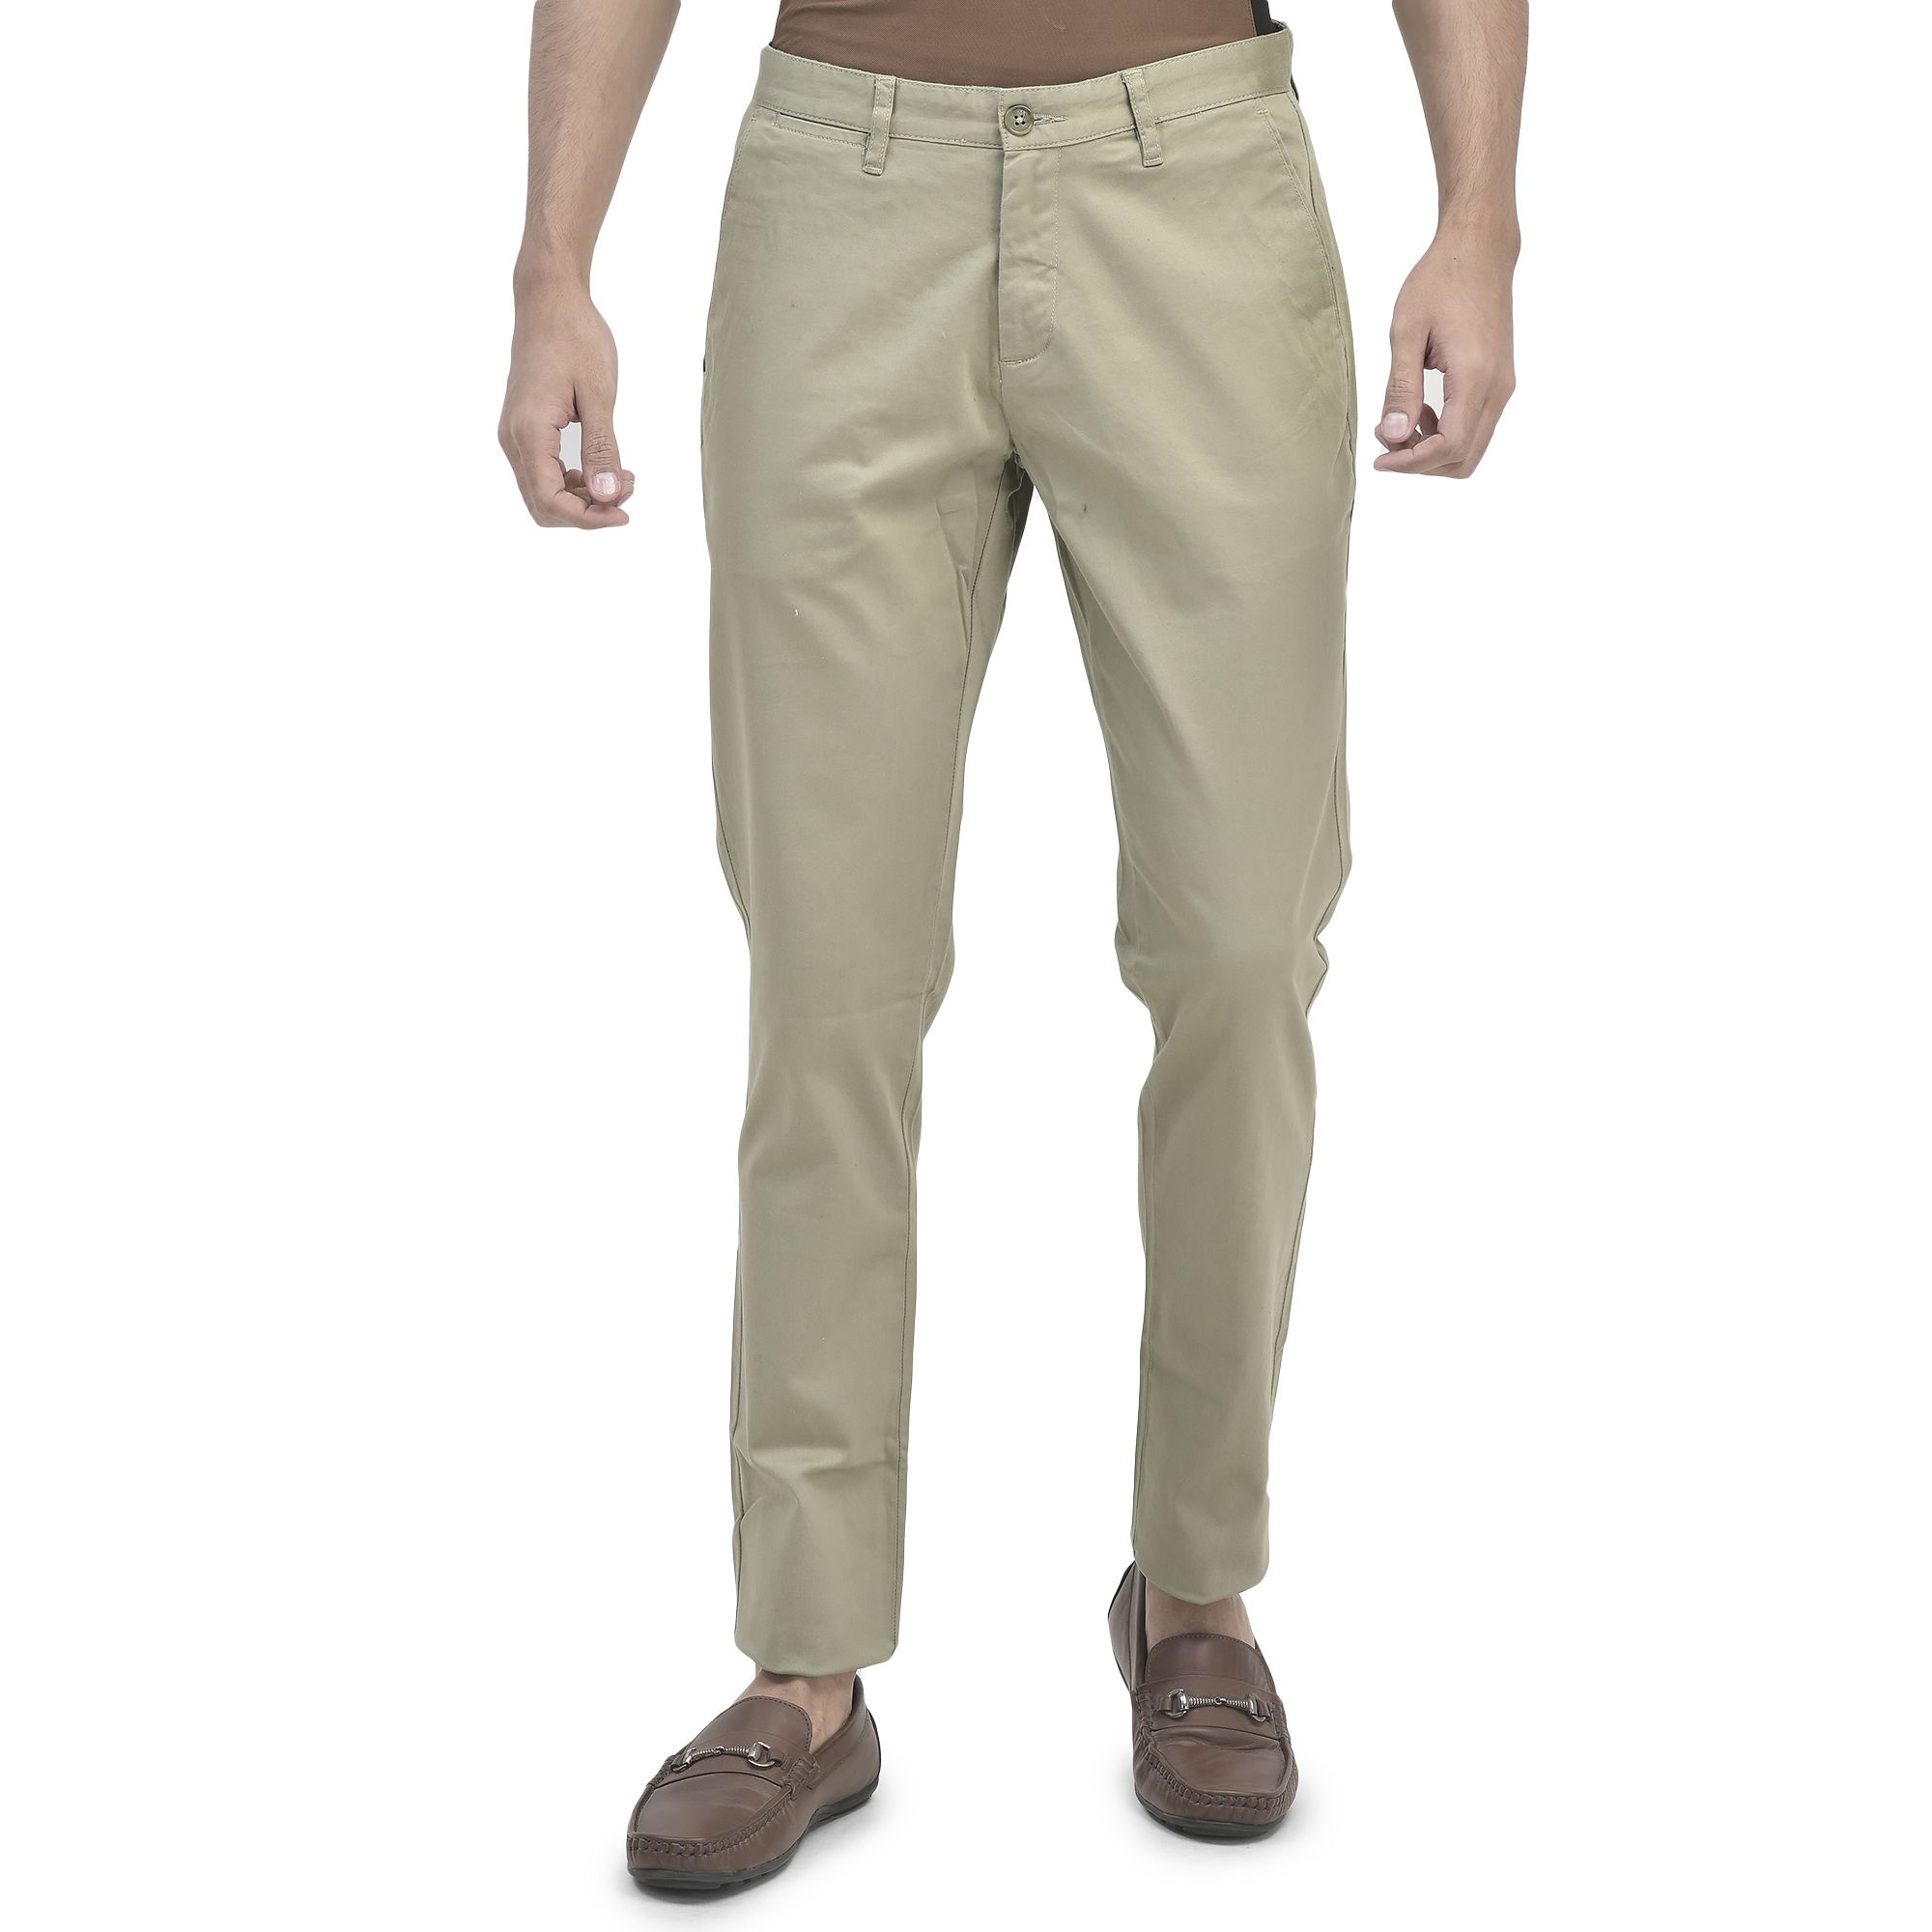 Lolive Chinos for Men